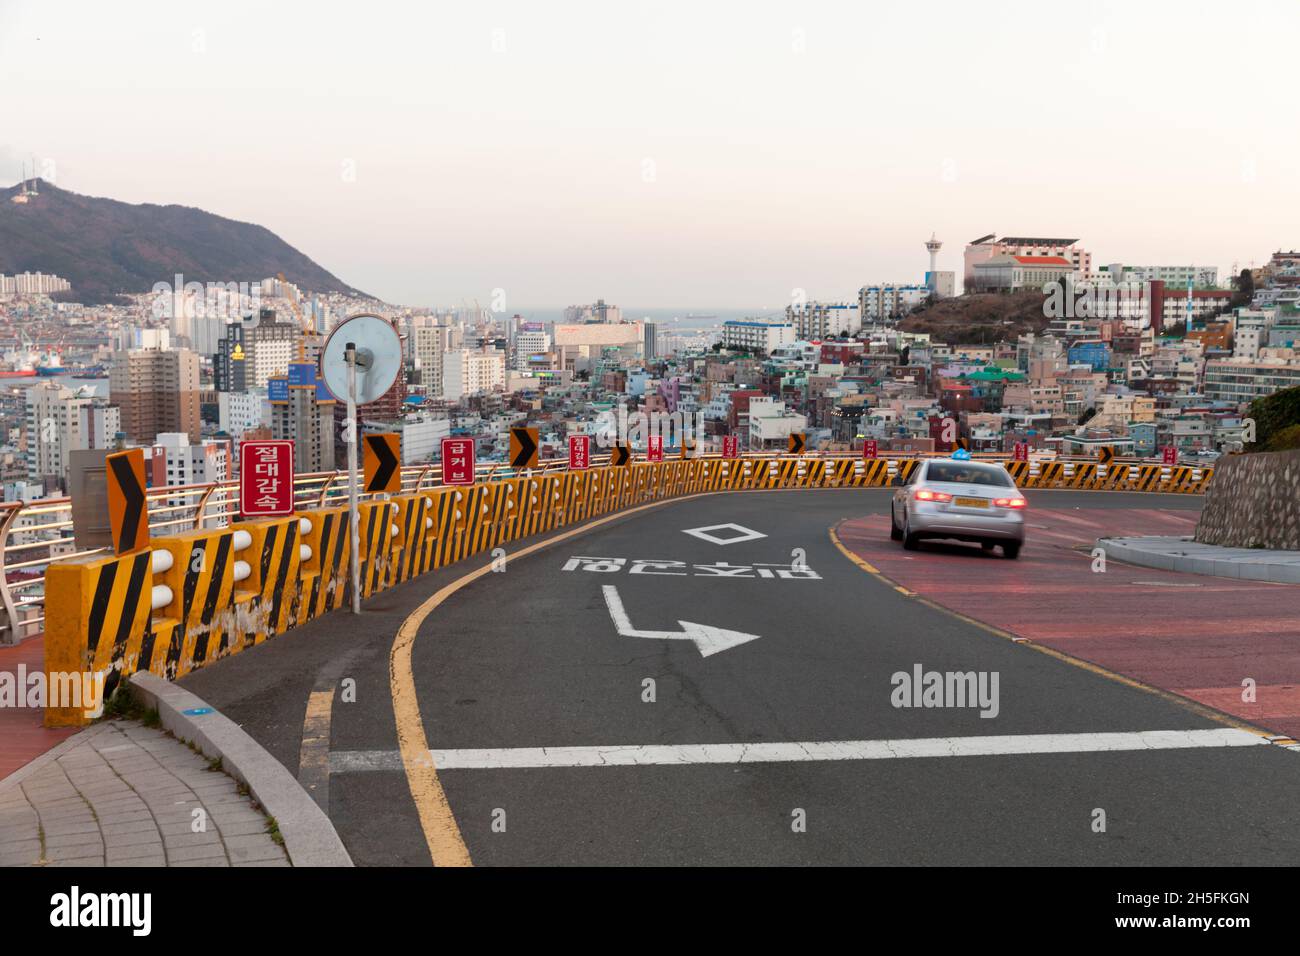 Busan, South Korea - March 13, 2018: Cityscape of Busan, street view with cars Stock Photo